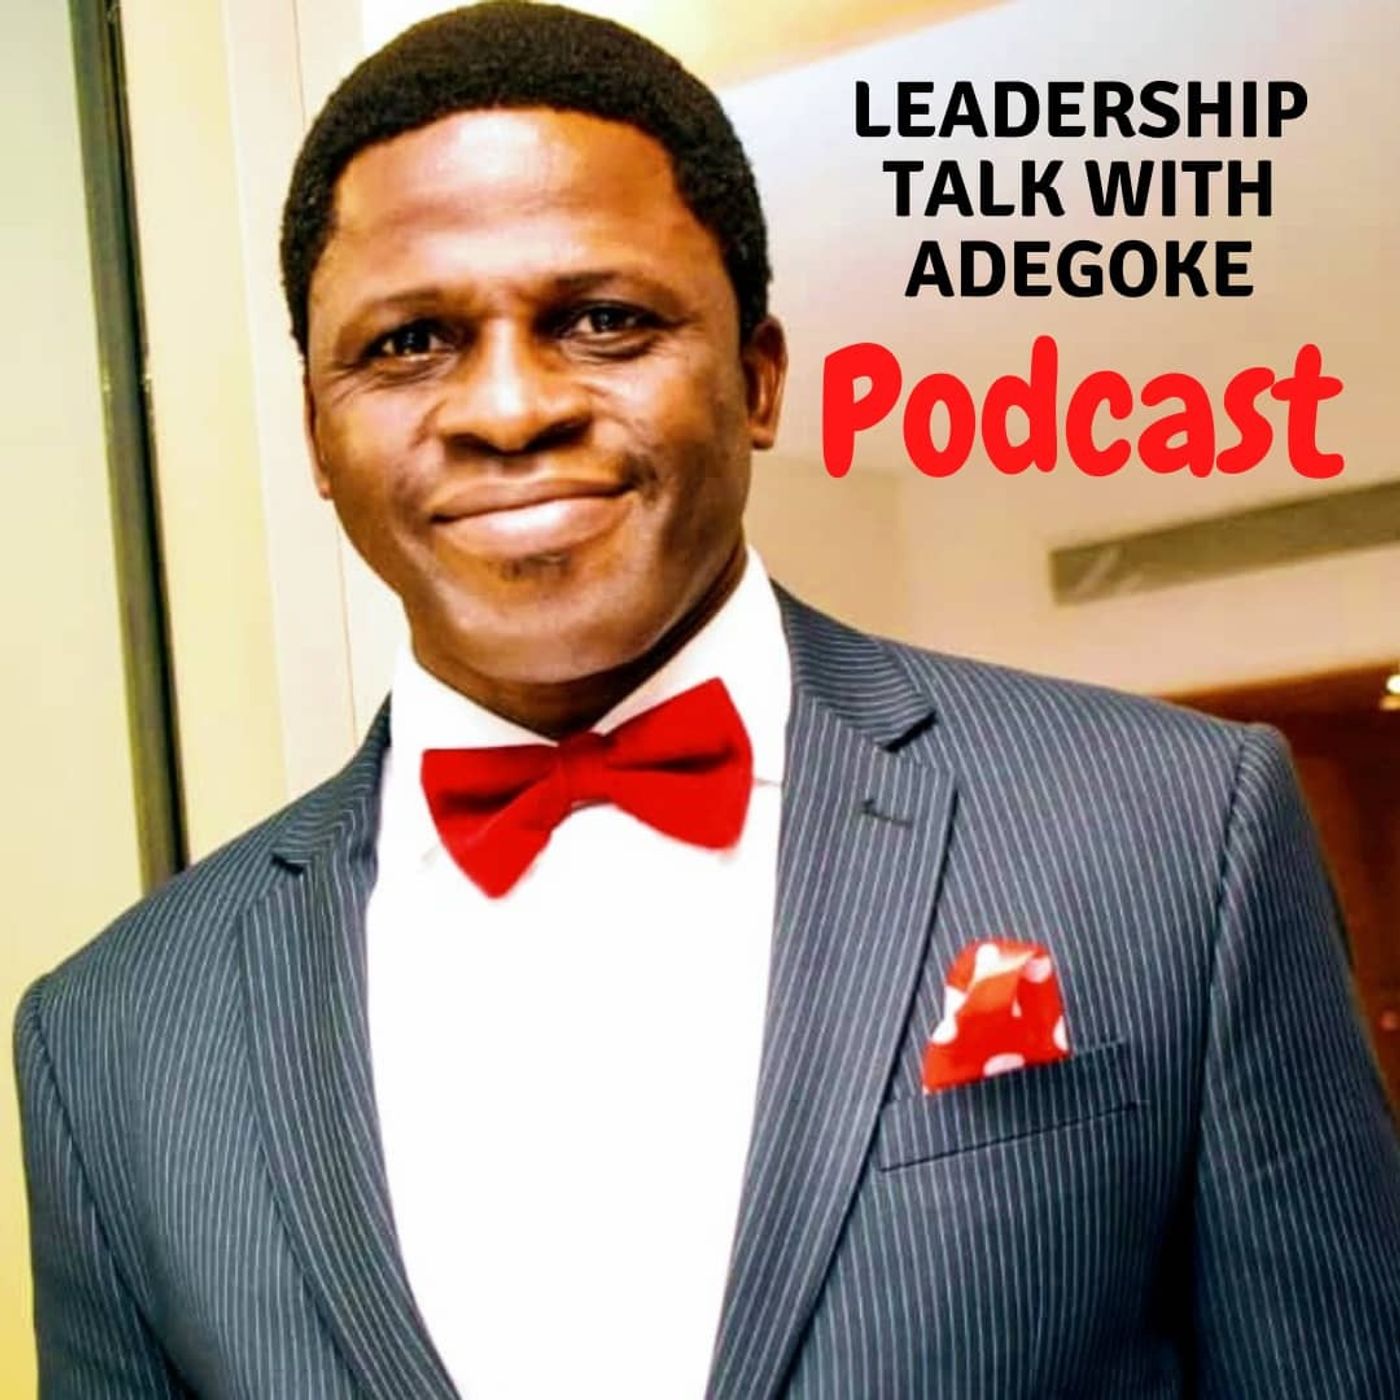 103: LEADERSHIP AND COMPETENCE